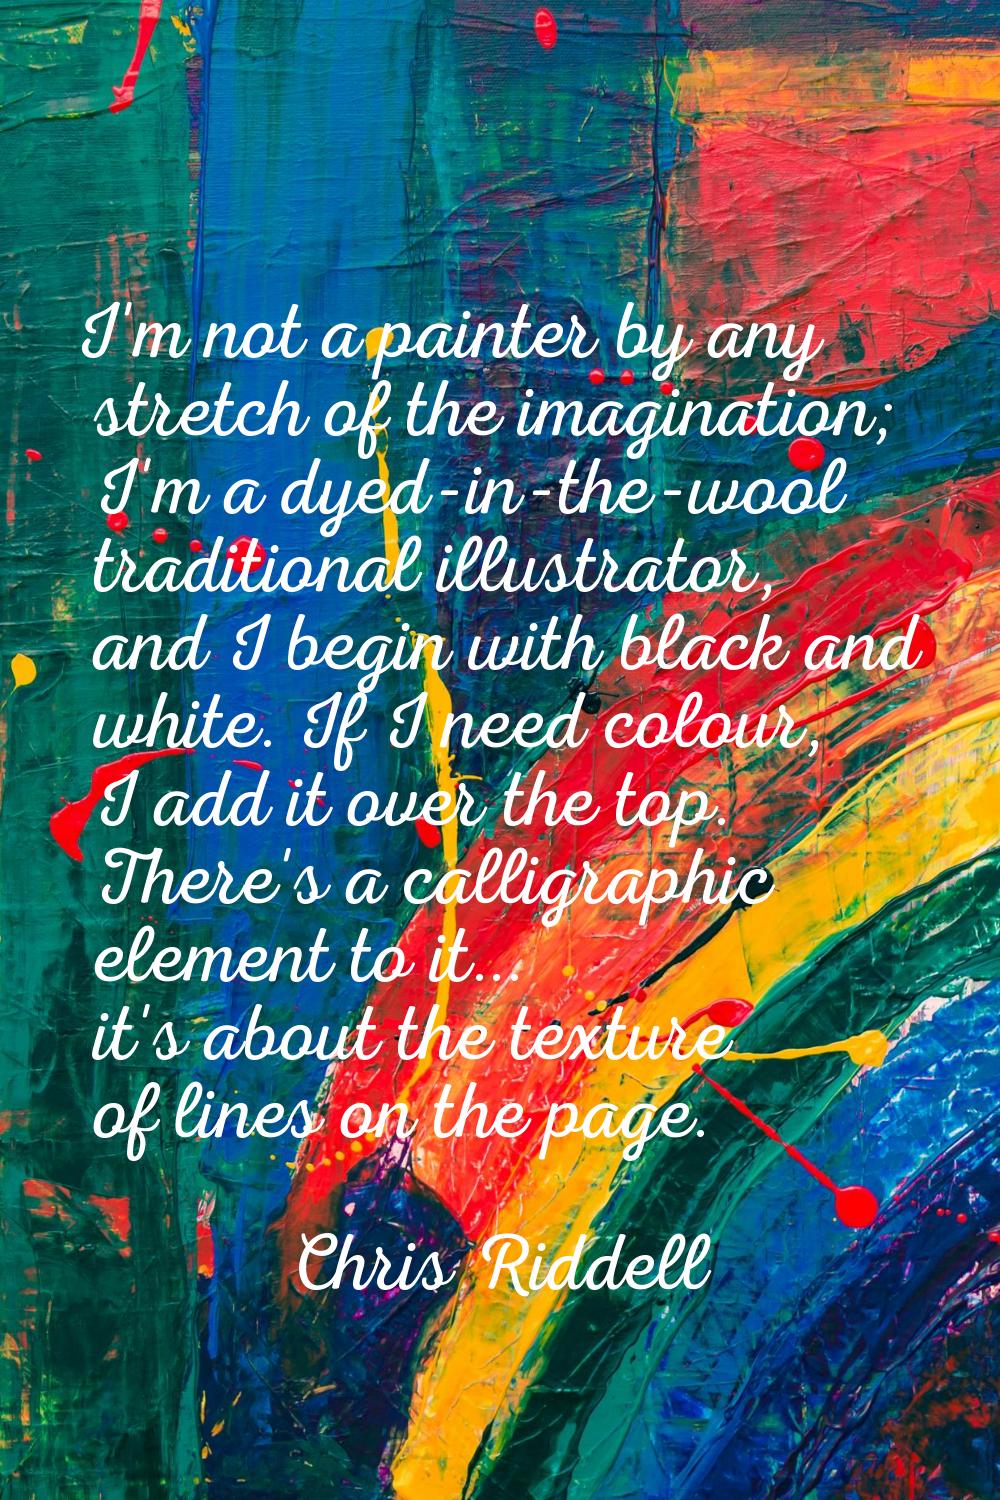 I'm not a painter by any stretch of the imagination; I'm a dyed-in-the-wool traditional illustrator